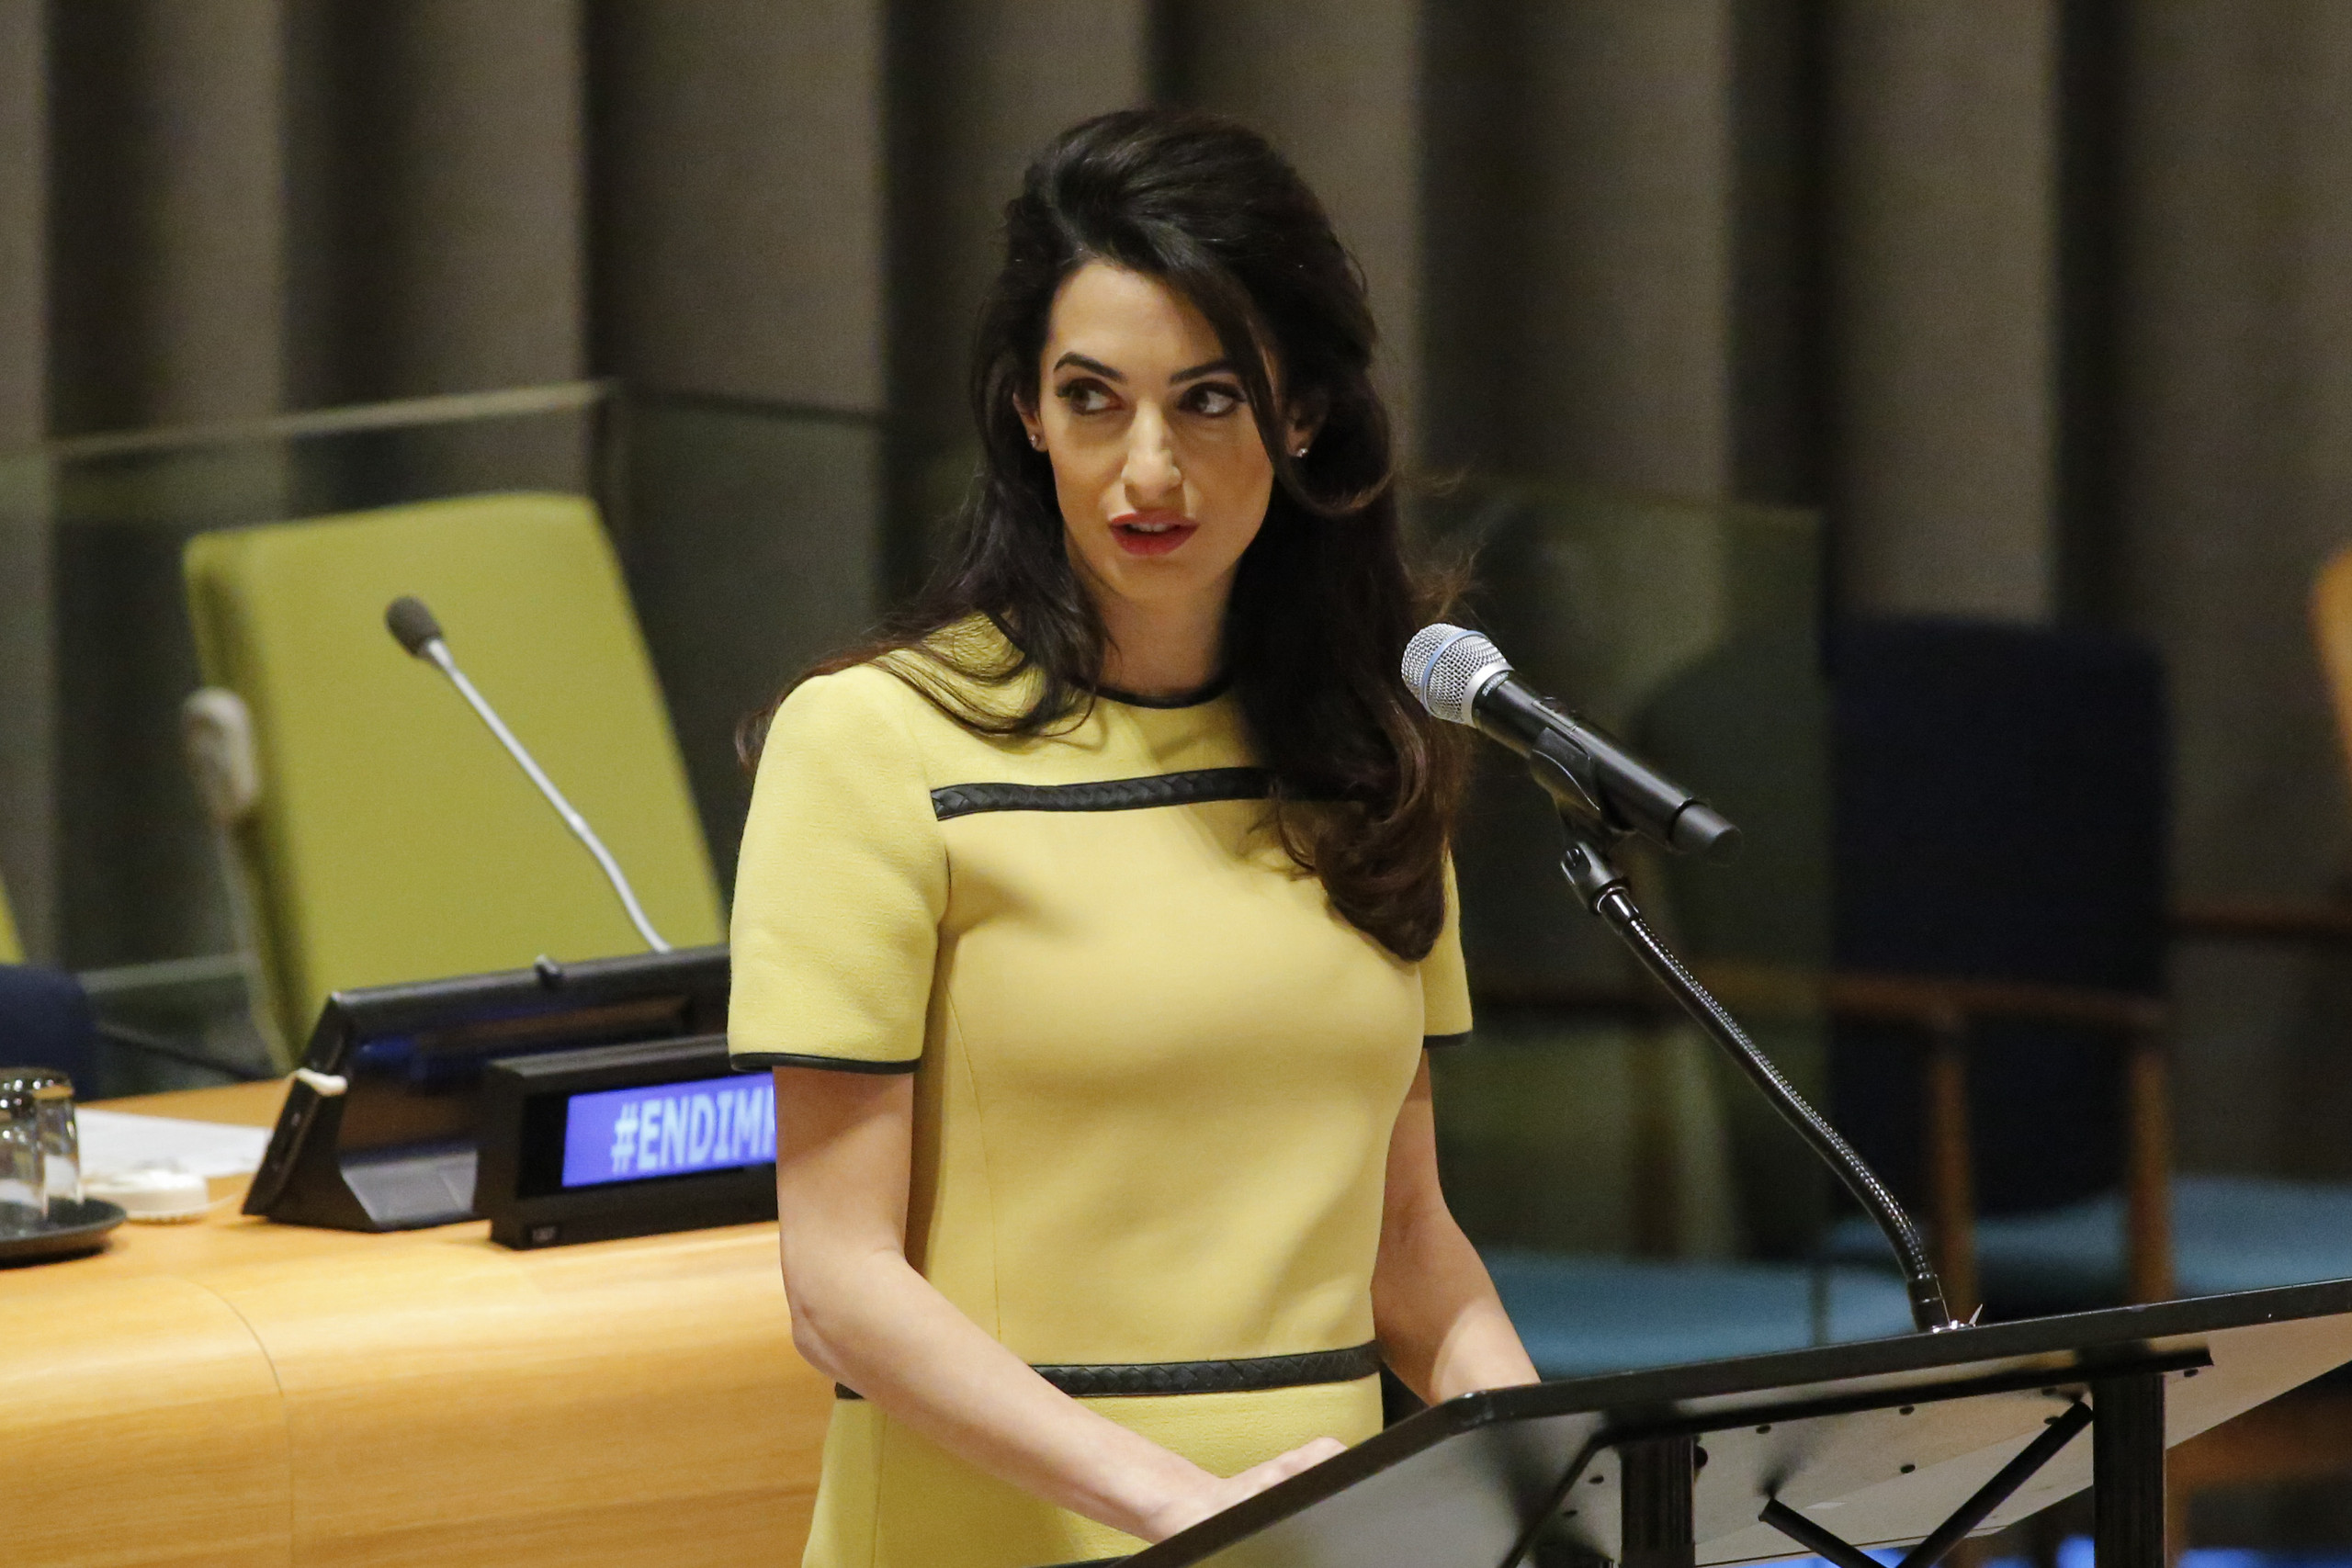 Amal Clooney "flaunting" her baby bump